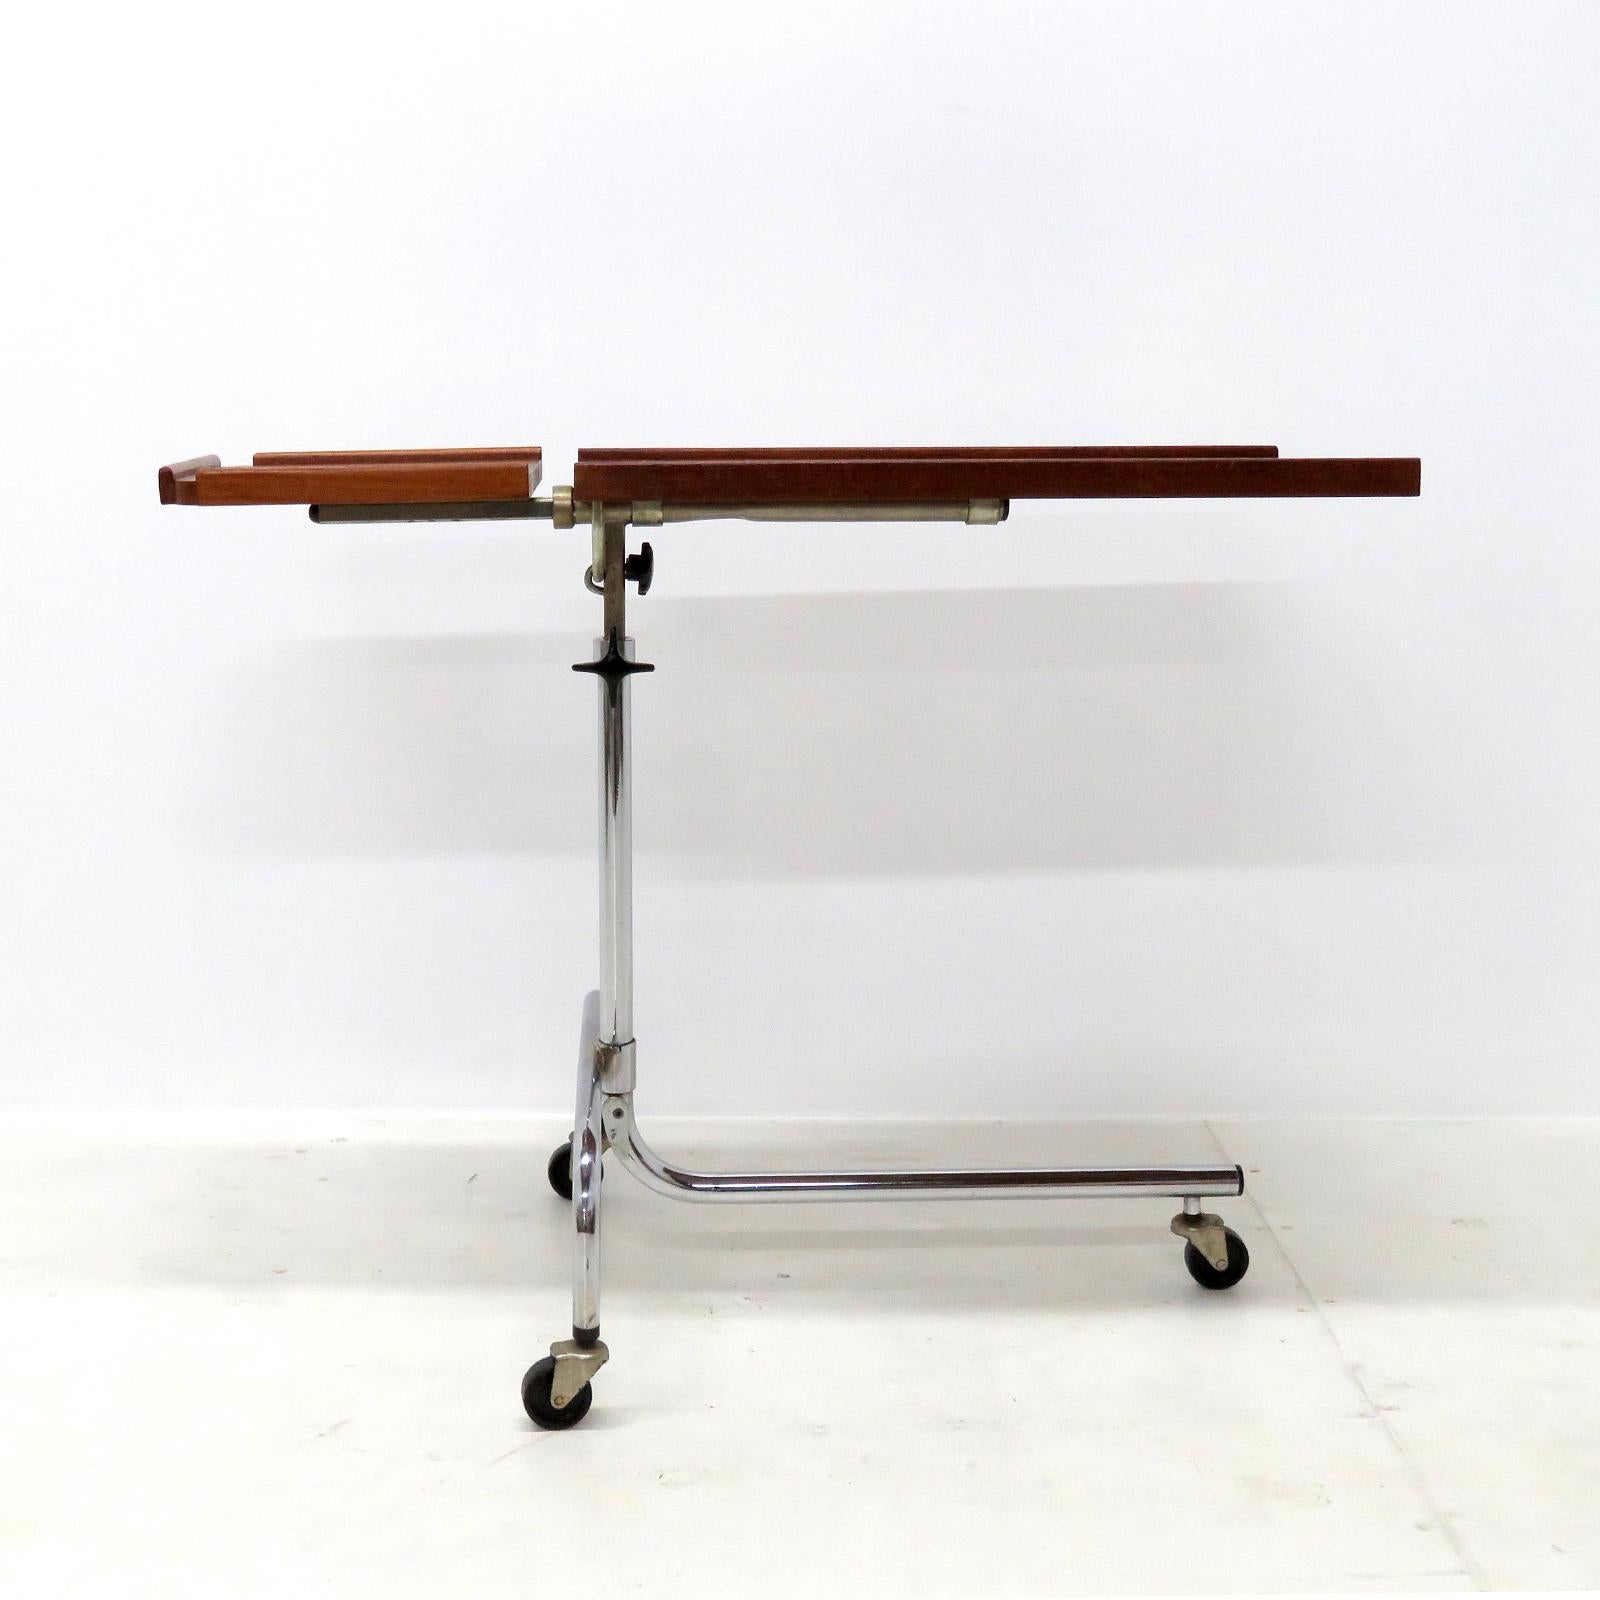 Great original 1950s Danish mobile reading or serving table by HMN Denmark, two teak trays on a chrome plated frame with three casters, adjustable in height (24